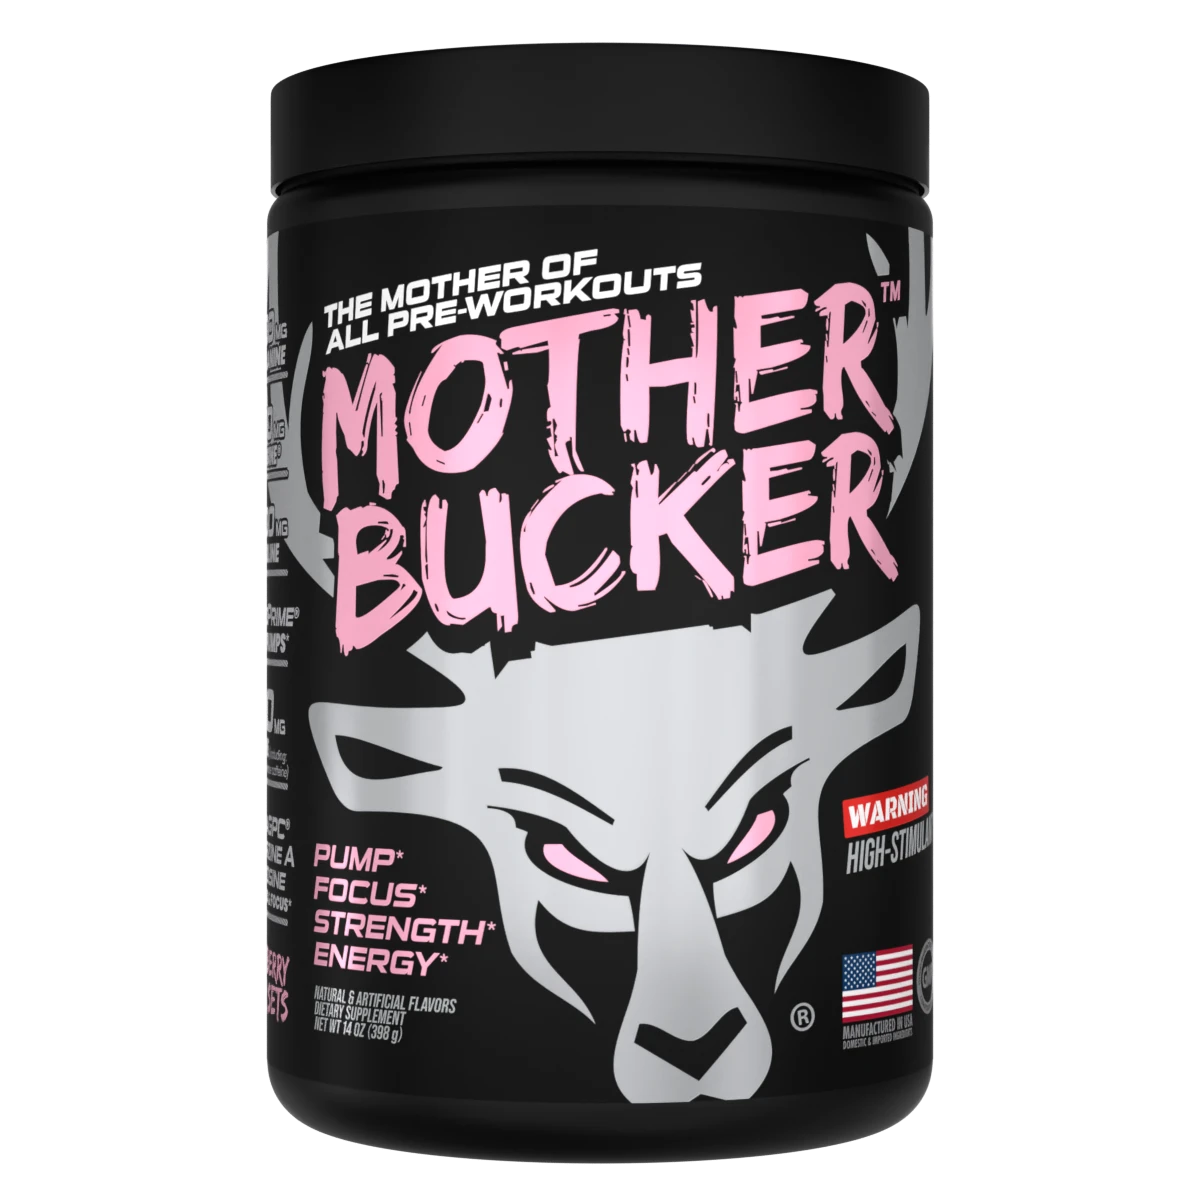 Bucked Up: Mother Bucker Pre-Workout